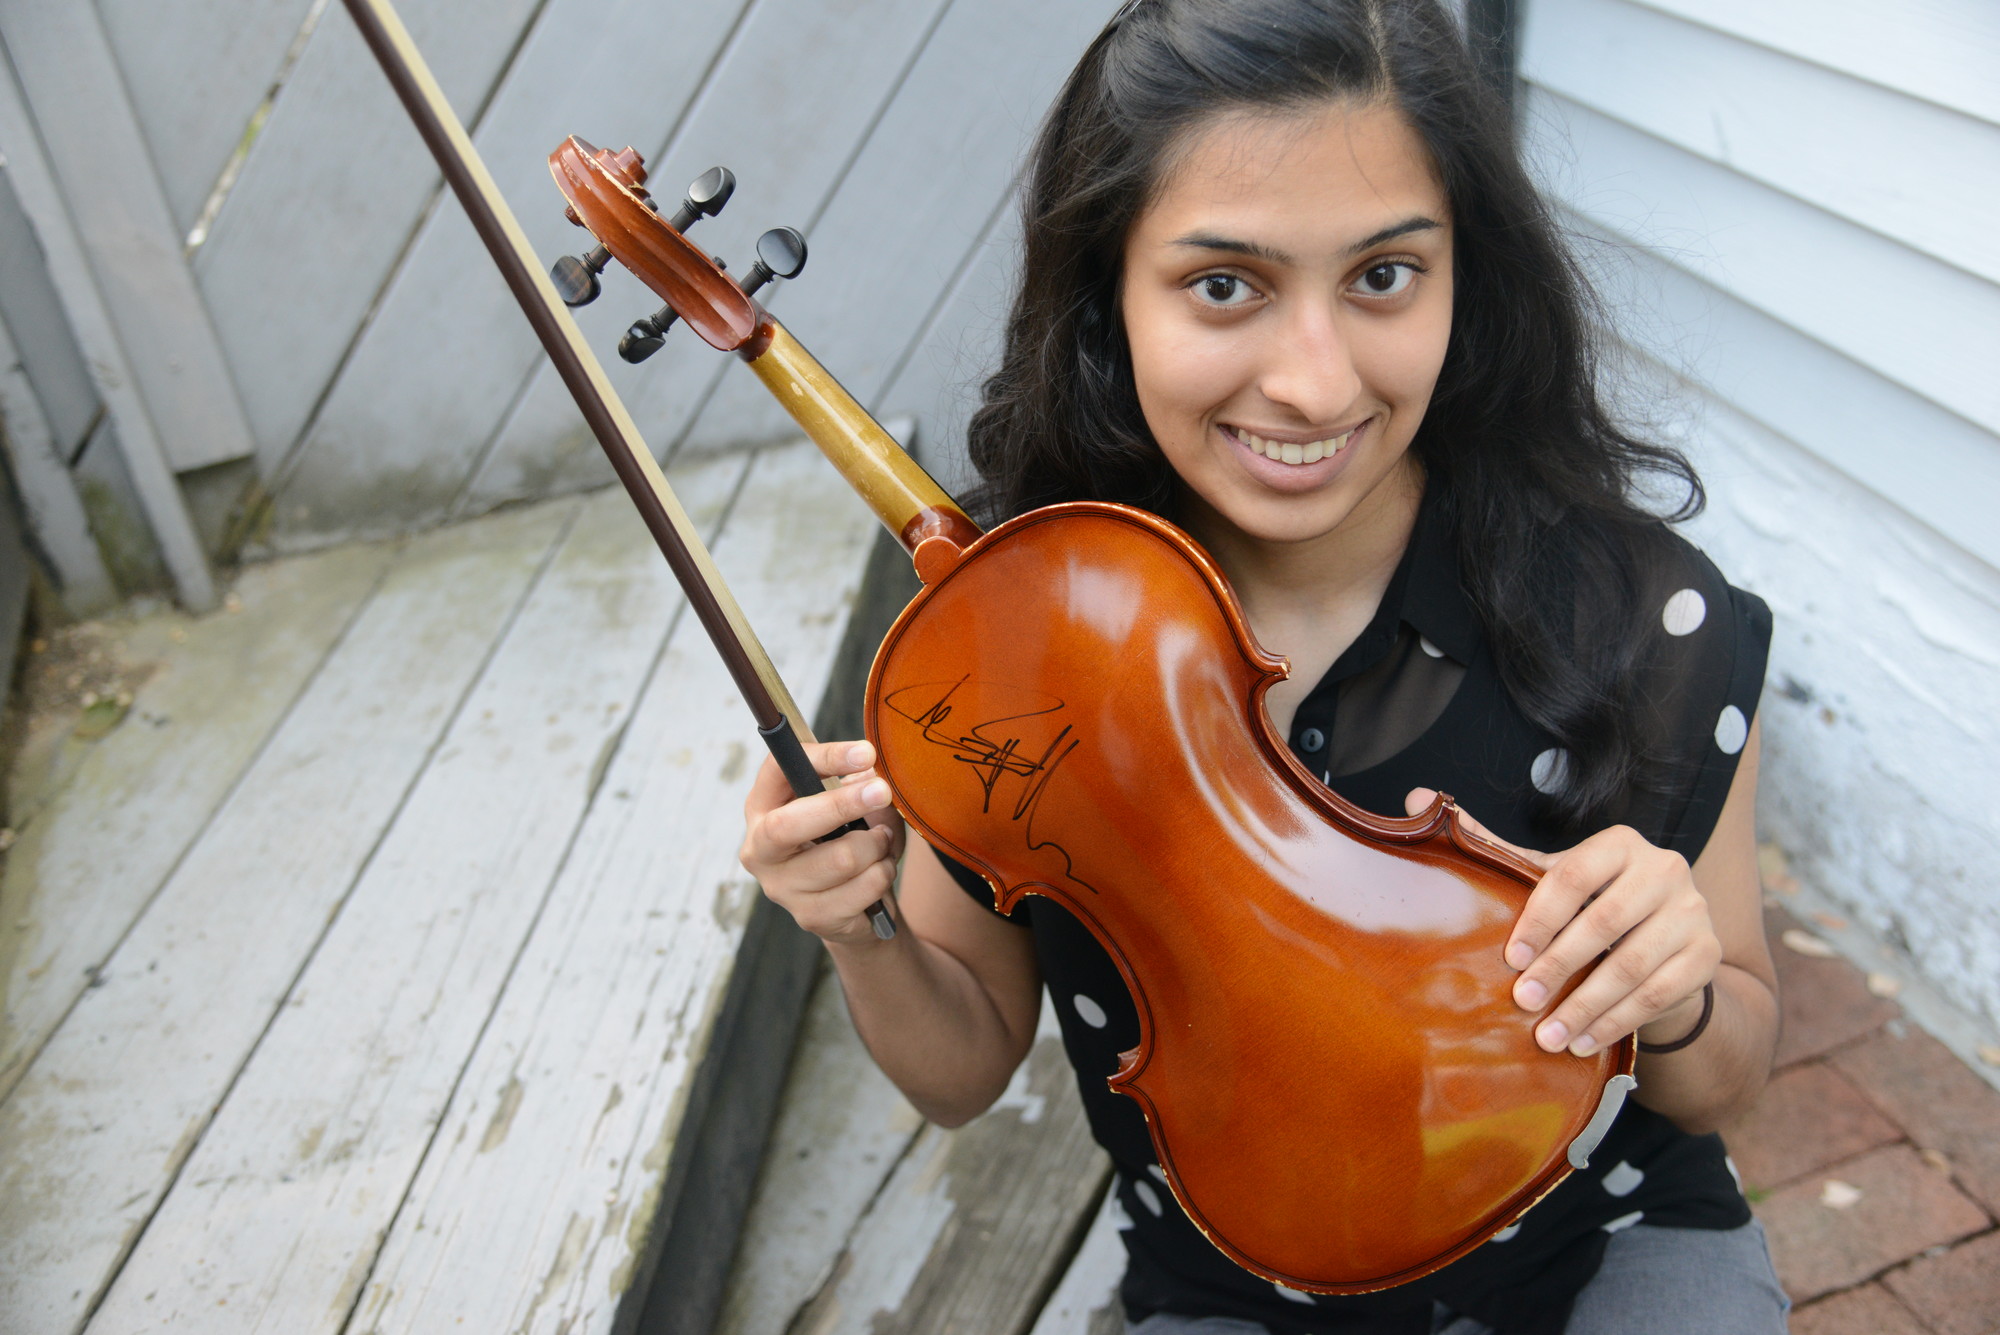 The sisters played at the NYCB Theatre in Westbury last December with the Piano Guys, a musical duo that combines classical and pop music. The group autographed Binita’s violin.